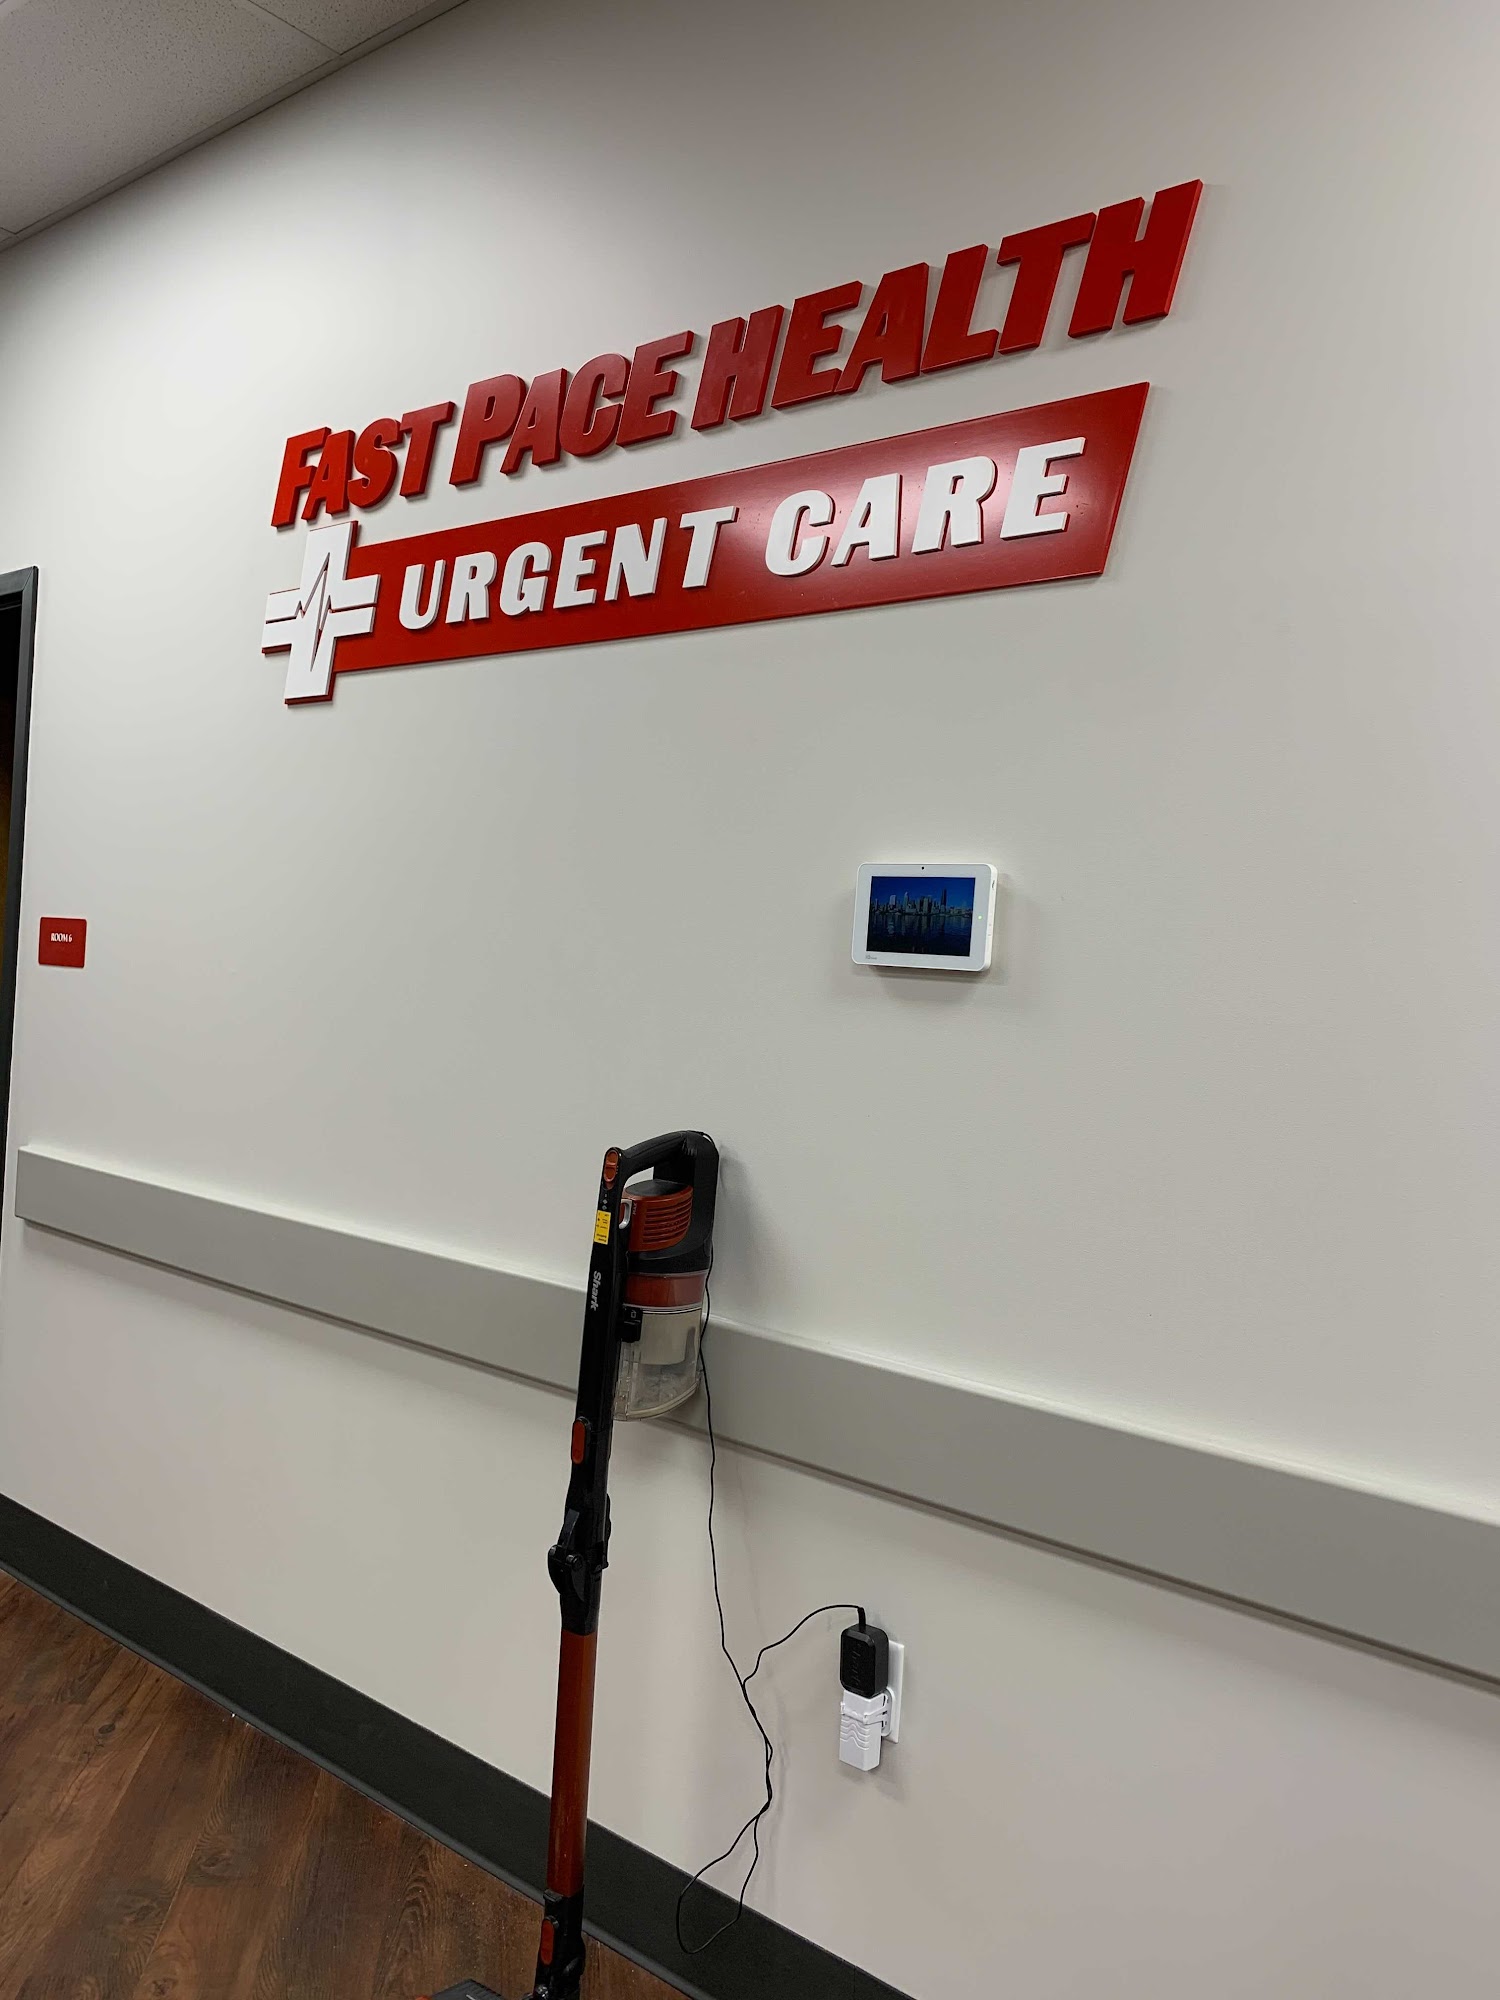 Fast Pace Health Urgent Care - Newton, MS 296 Eastside Dr, Newton Mississippi 39345